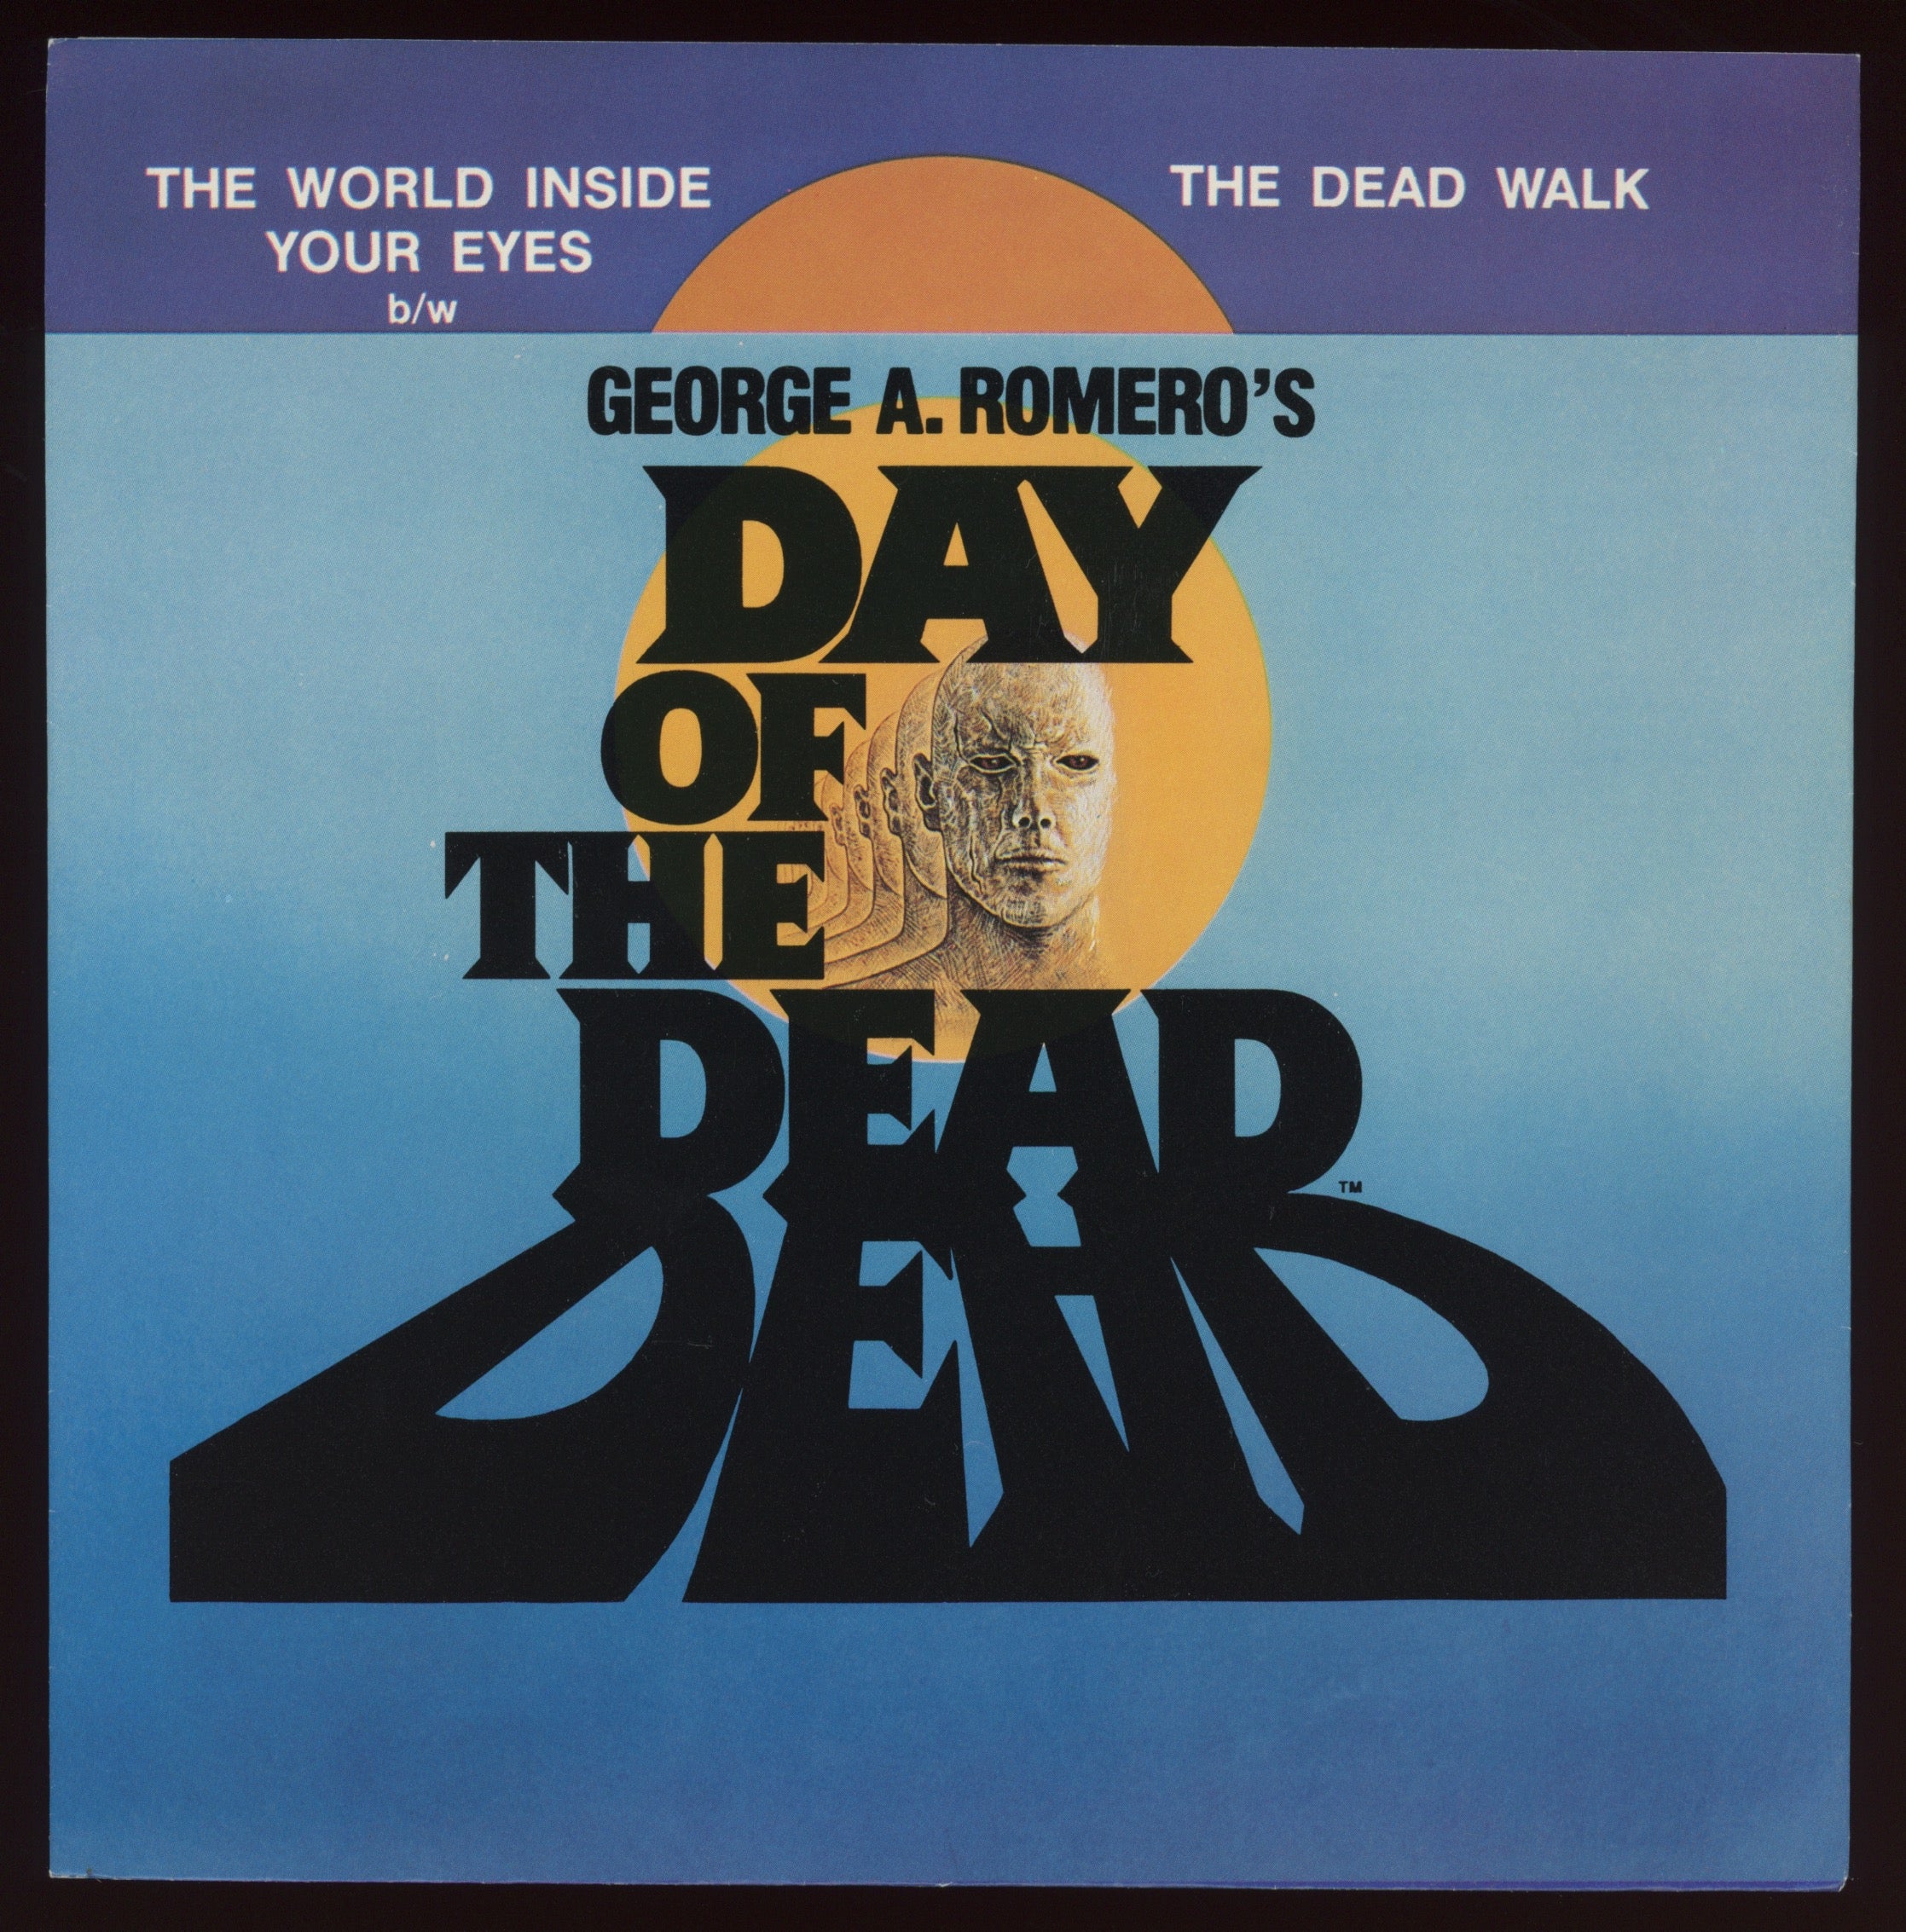 Modern Man - The Dead Walk on Saturn Day of the Dead With Picture Sleeve